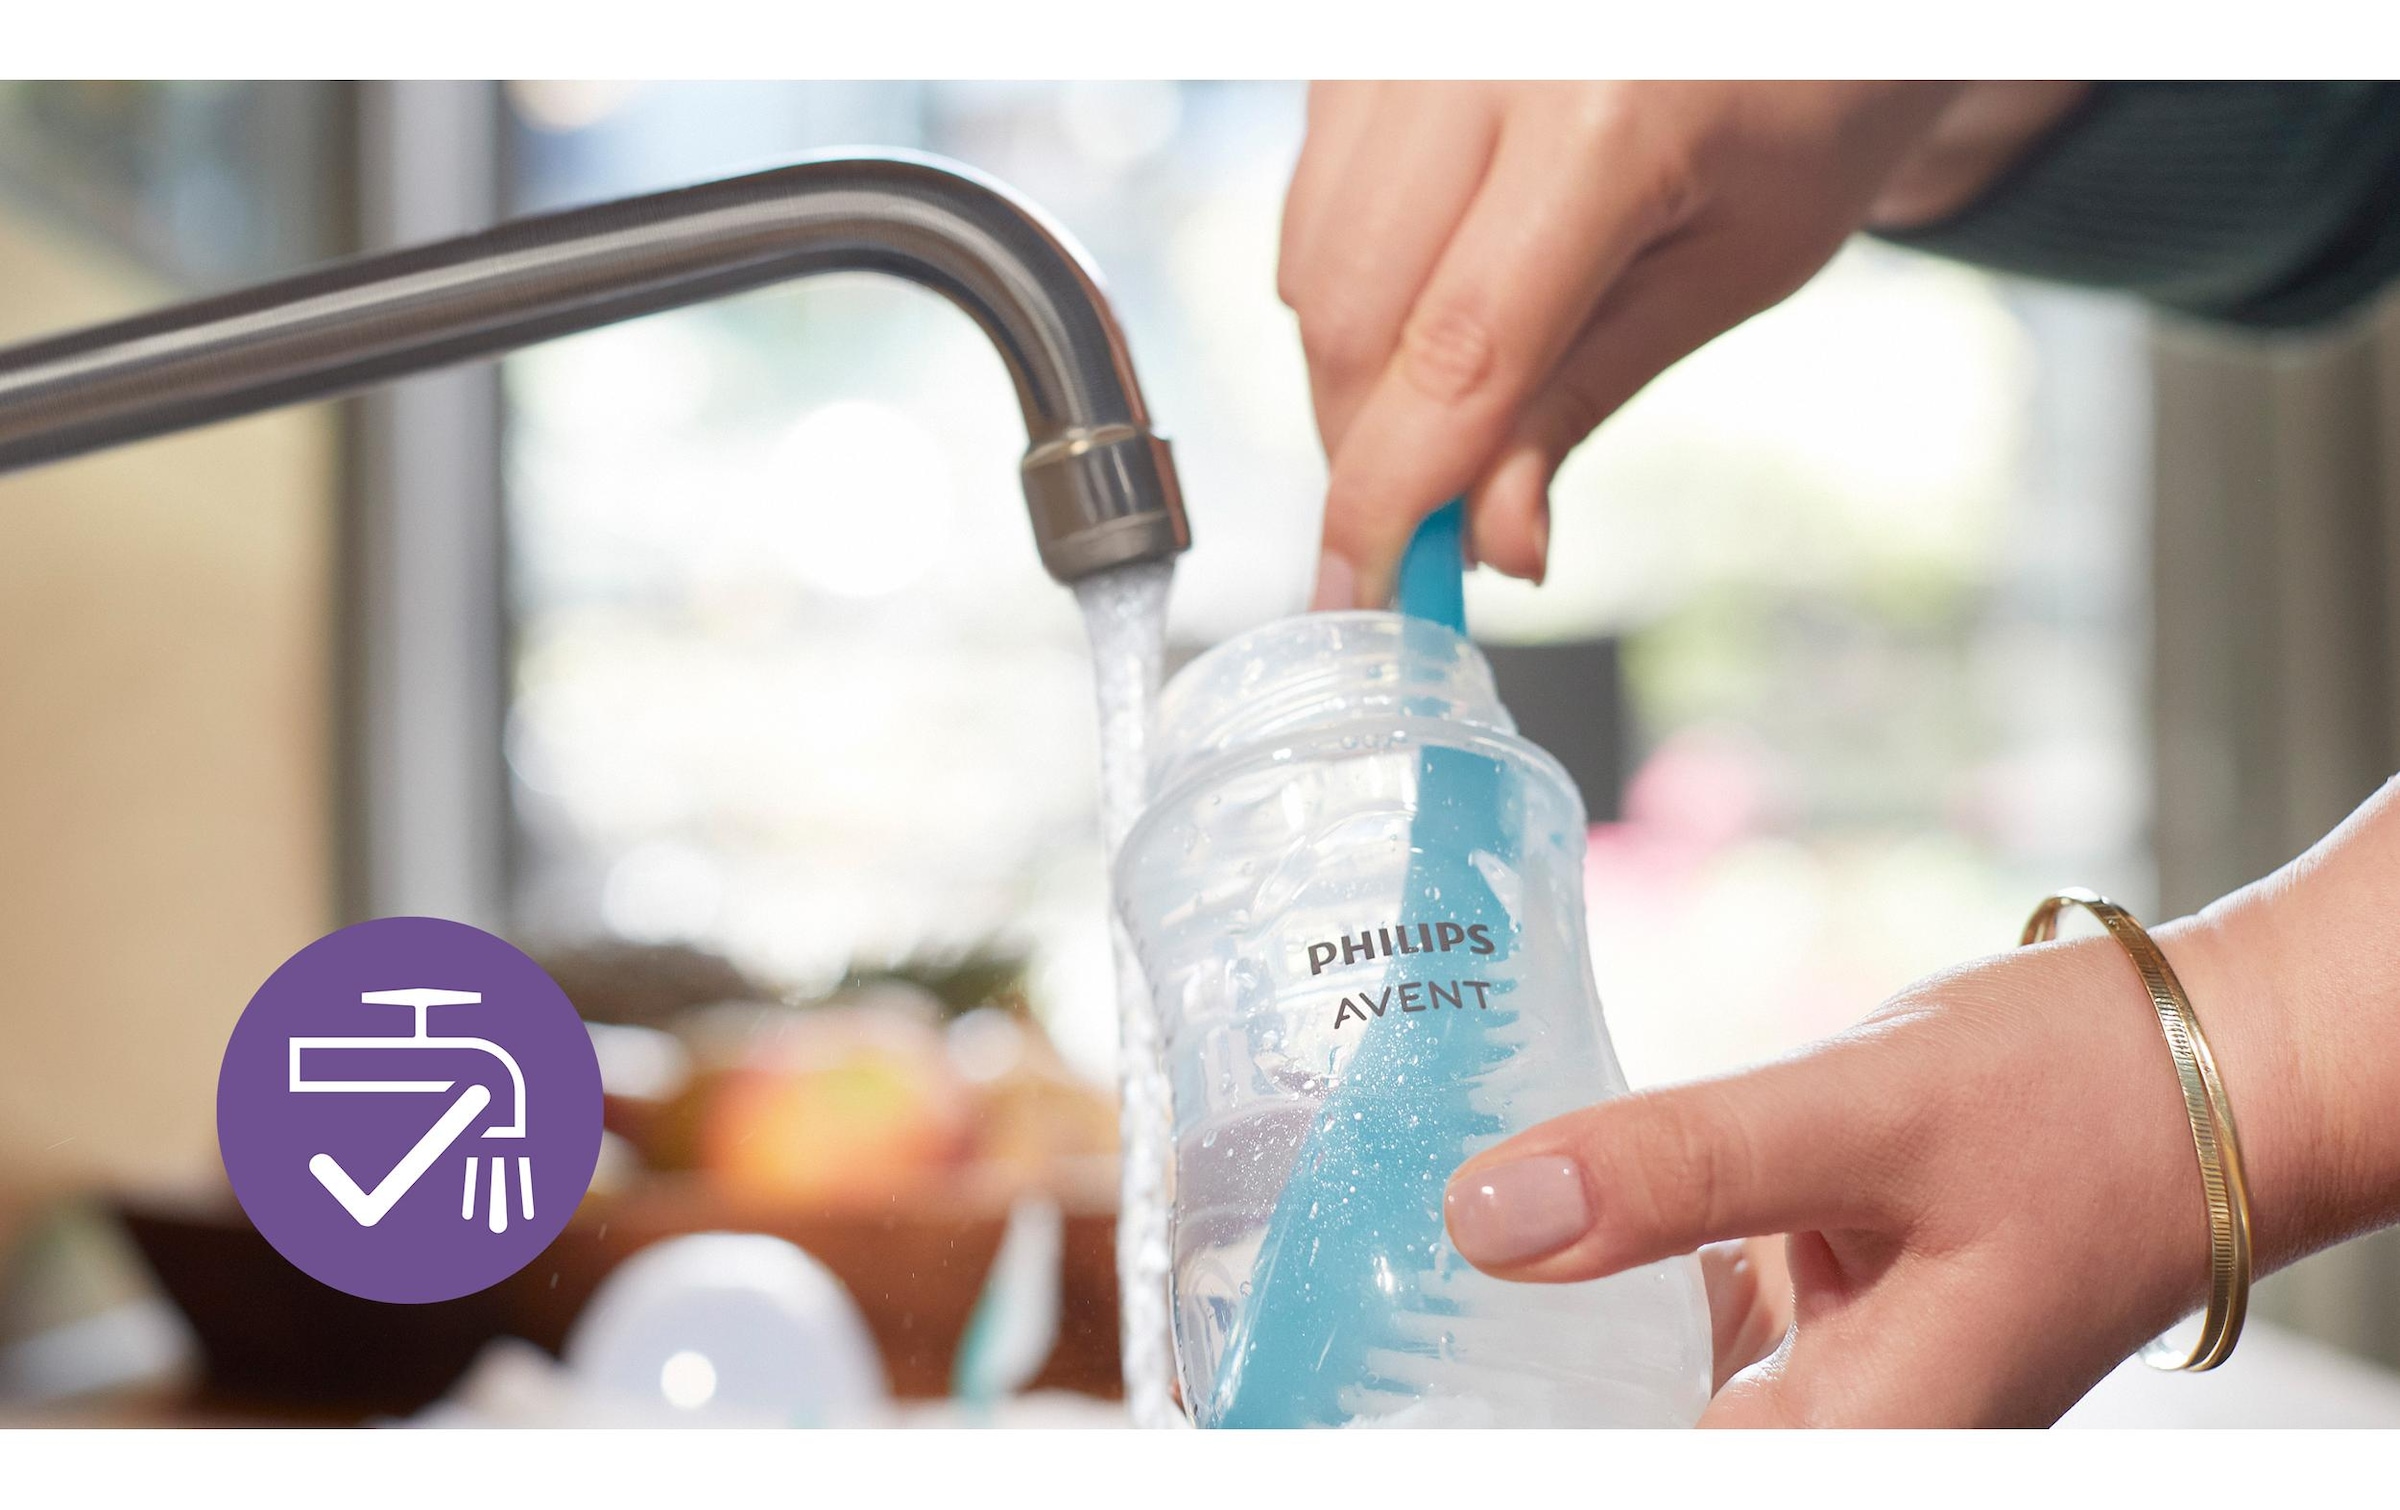 Philips AVENT Babyflasche »Philips Avent Natural Response Flasche«, (2 tlg.)